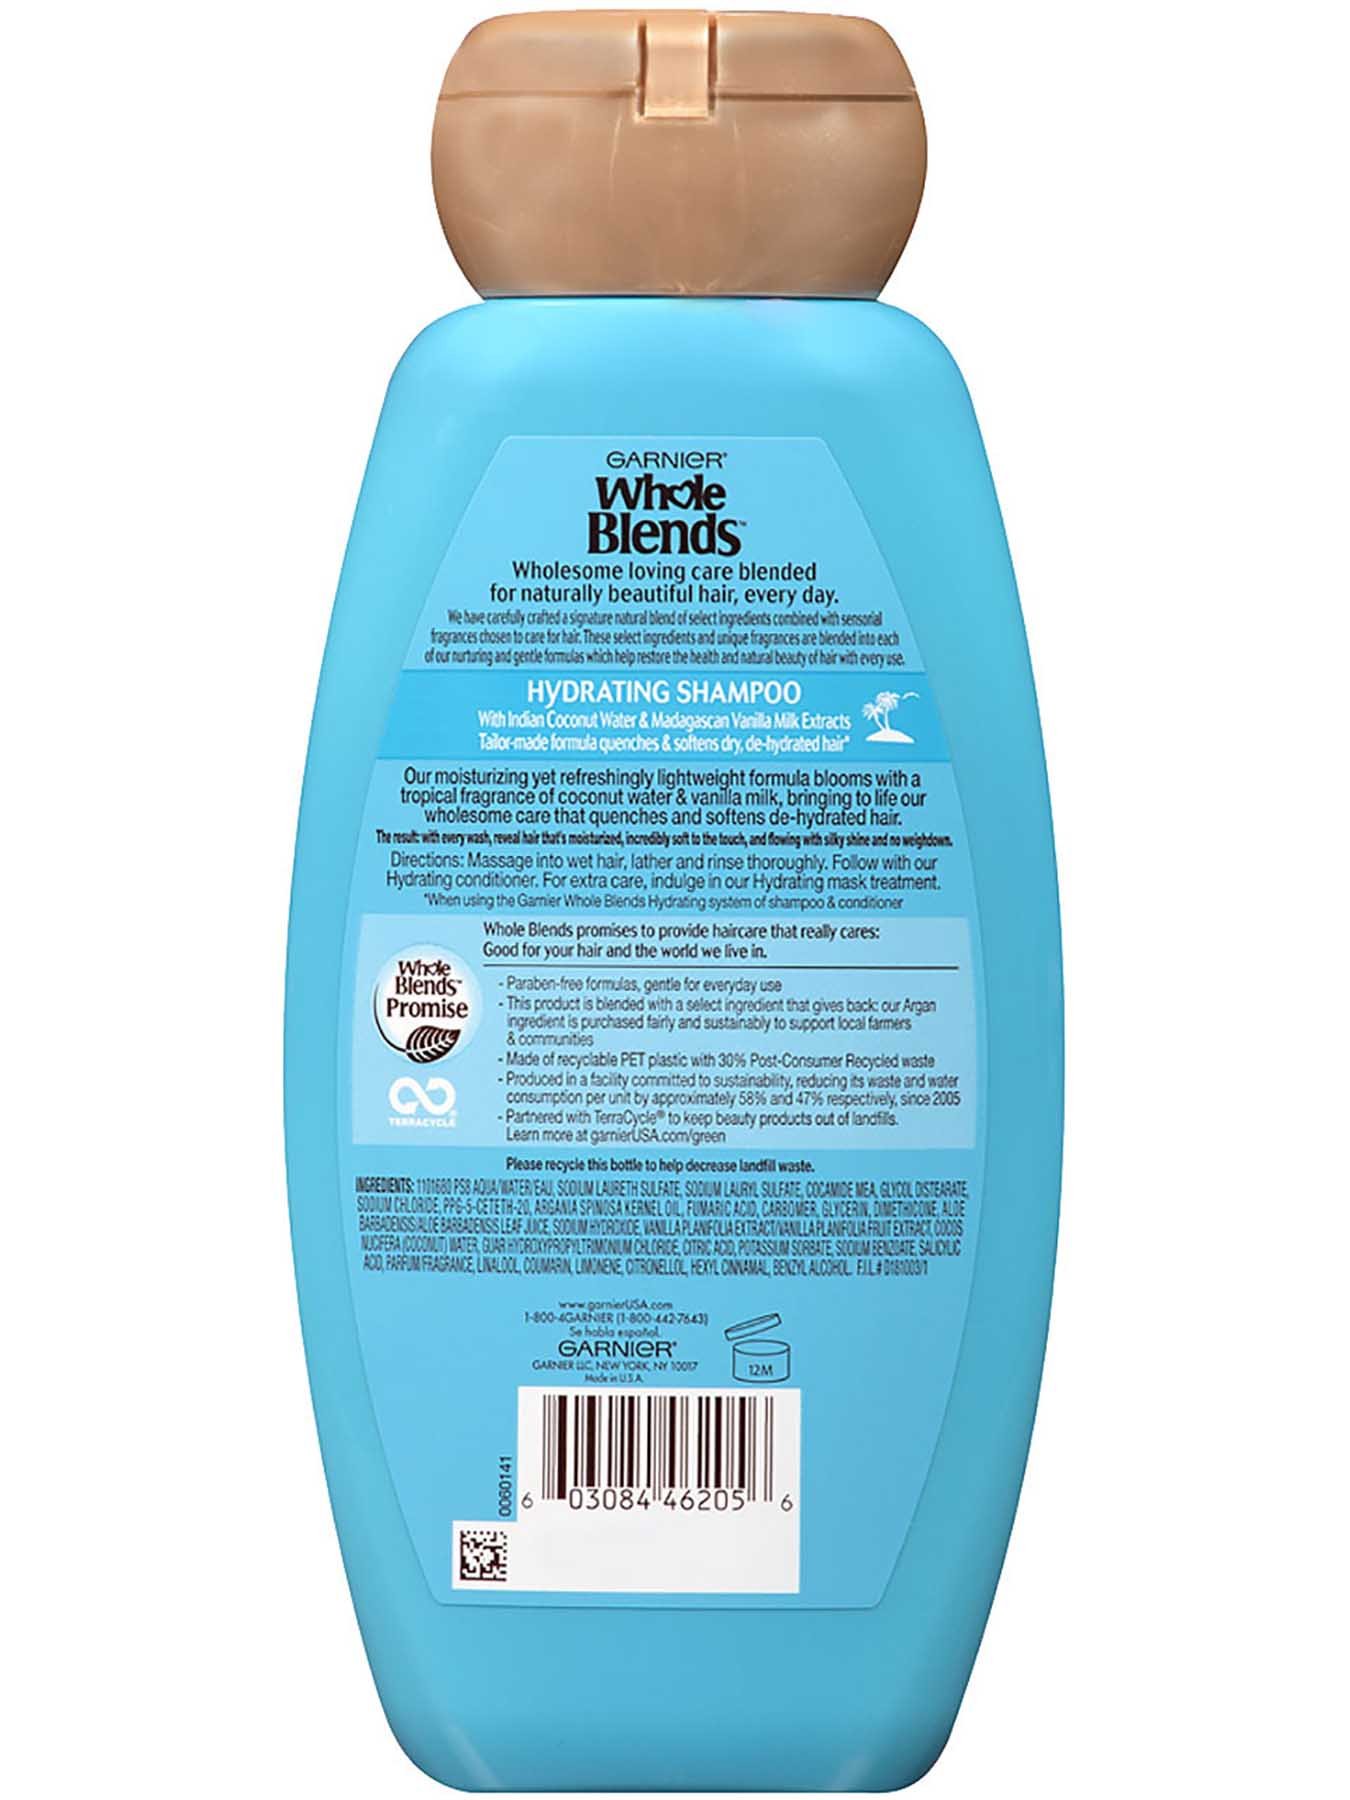 Back view of Hydrating Shampoo with Coconut Water and Vanilla Milk Extracts.